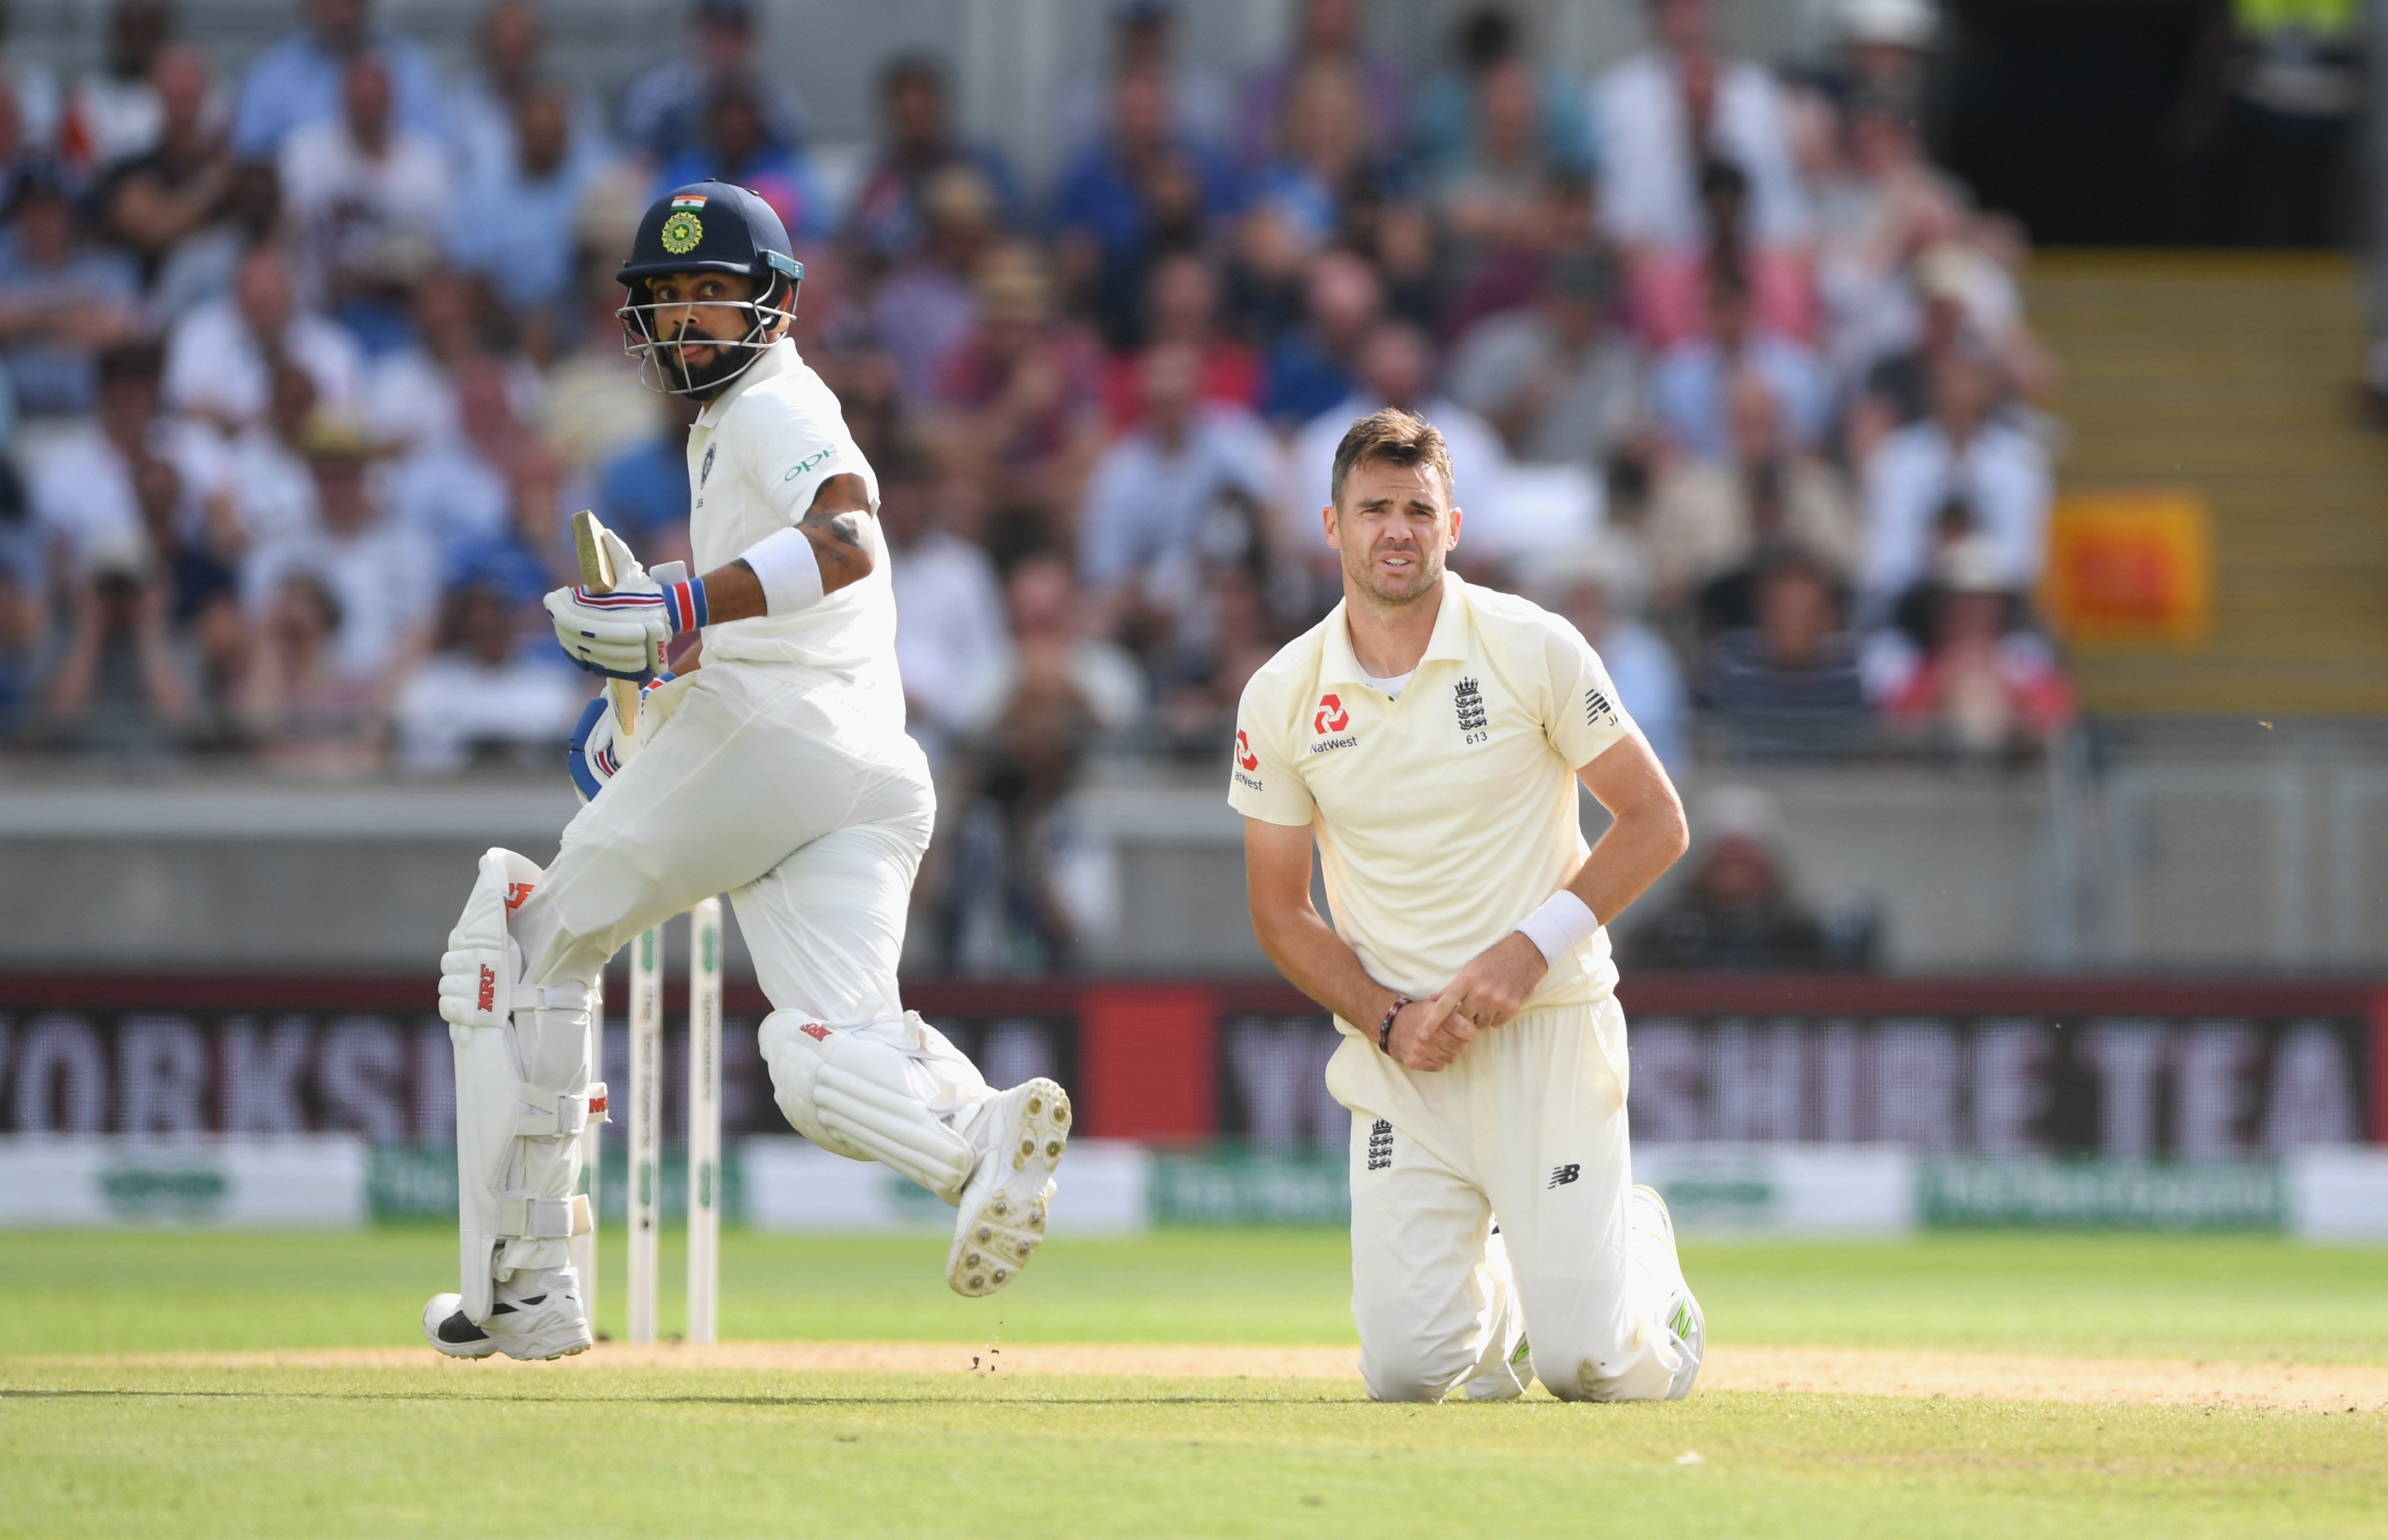 ENG vs IND | Virat Kohli will always have doubts facing James Anderson, admits Irfan Pathan